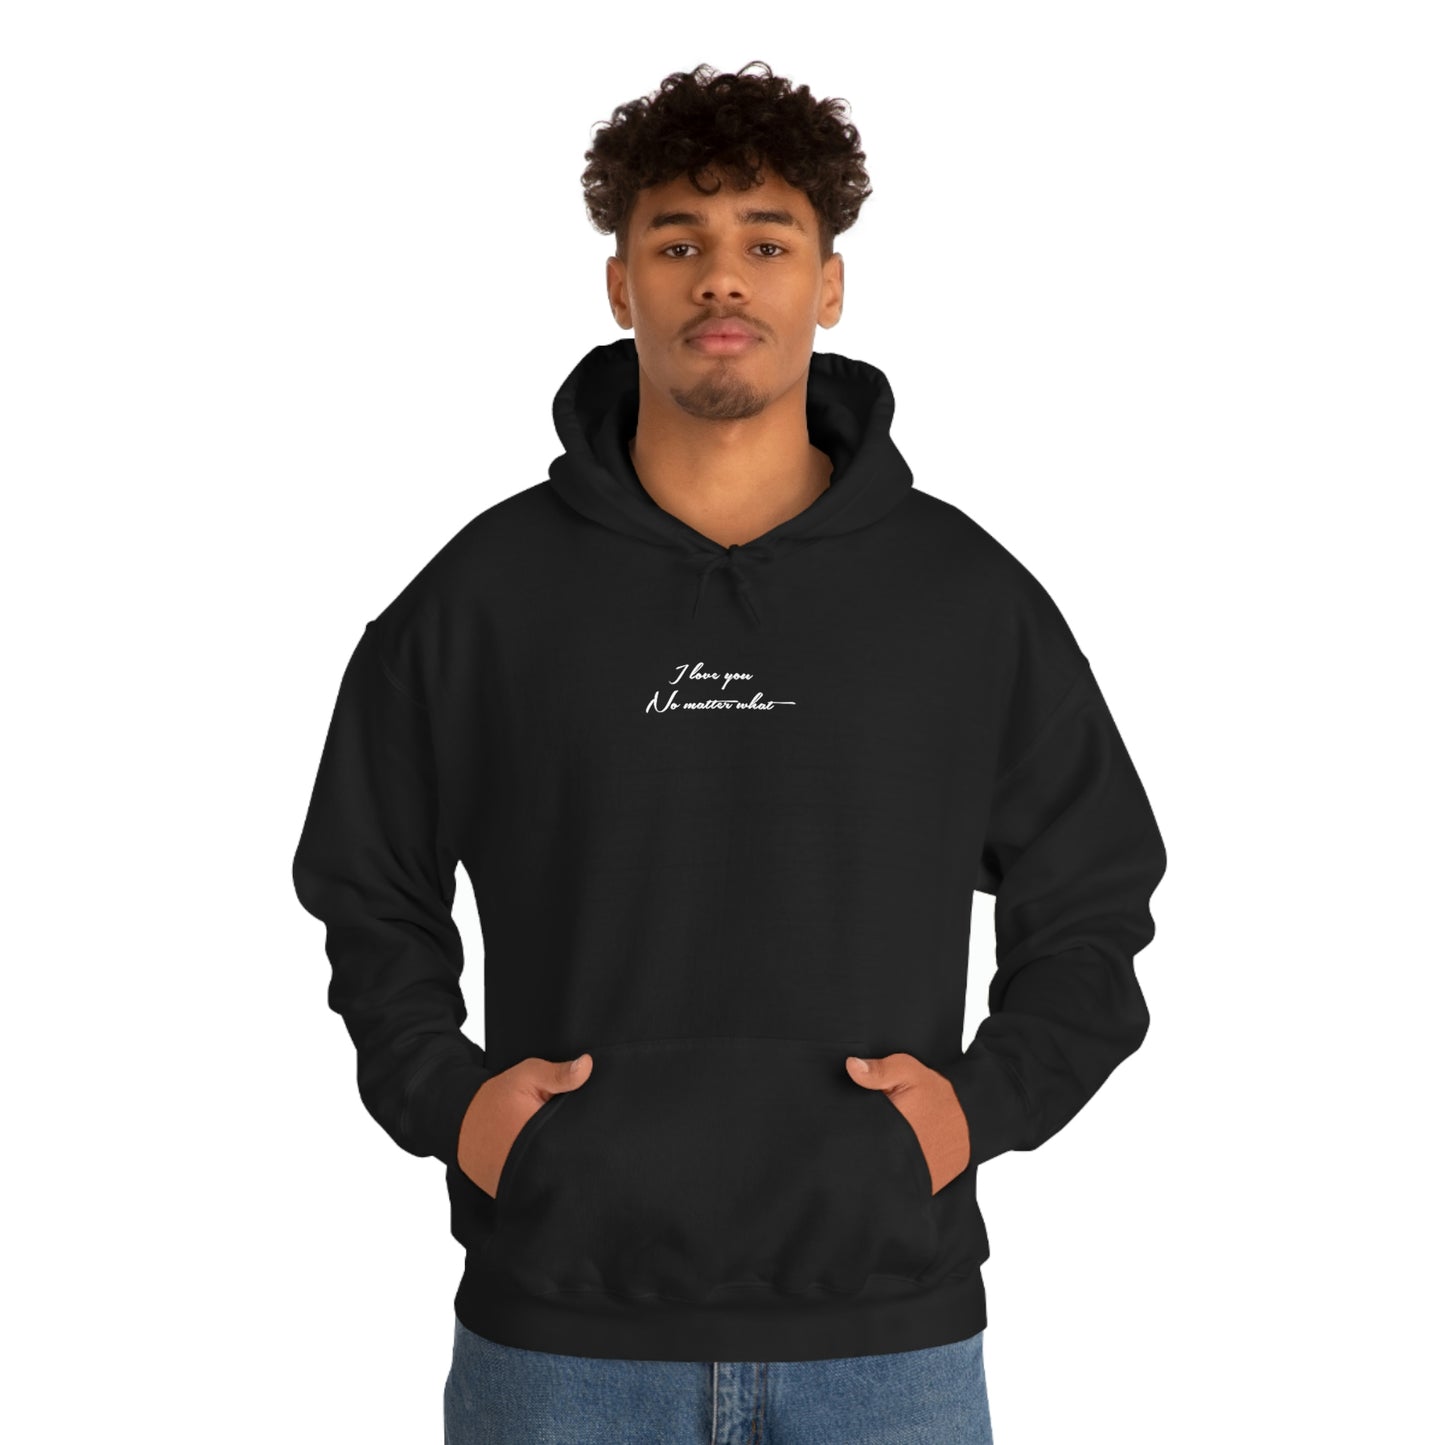 "YOU ARE ENOUGH" Hooded Sweatshirt